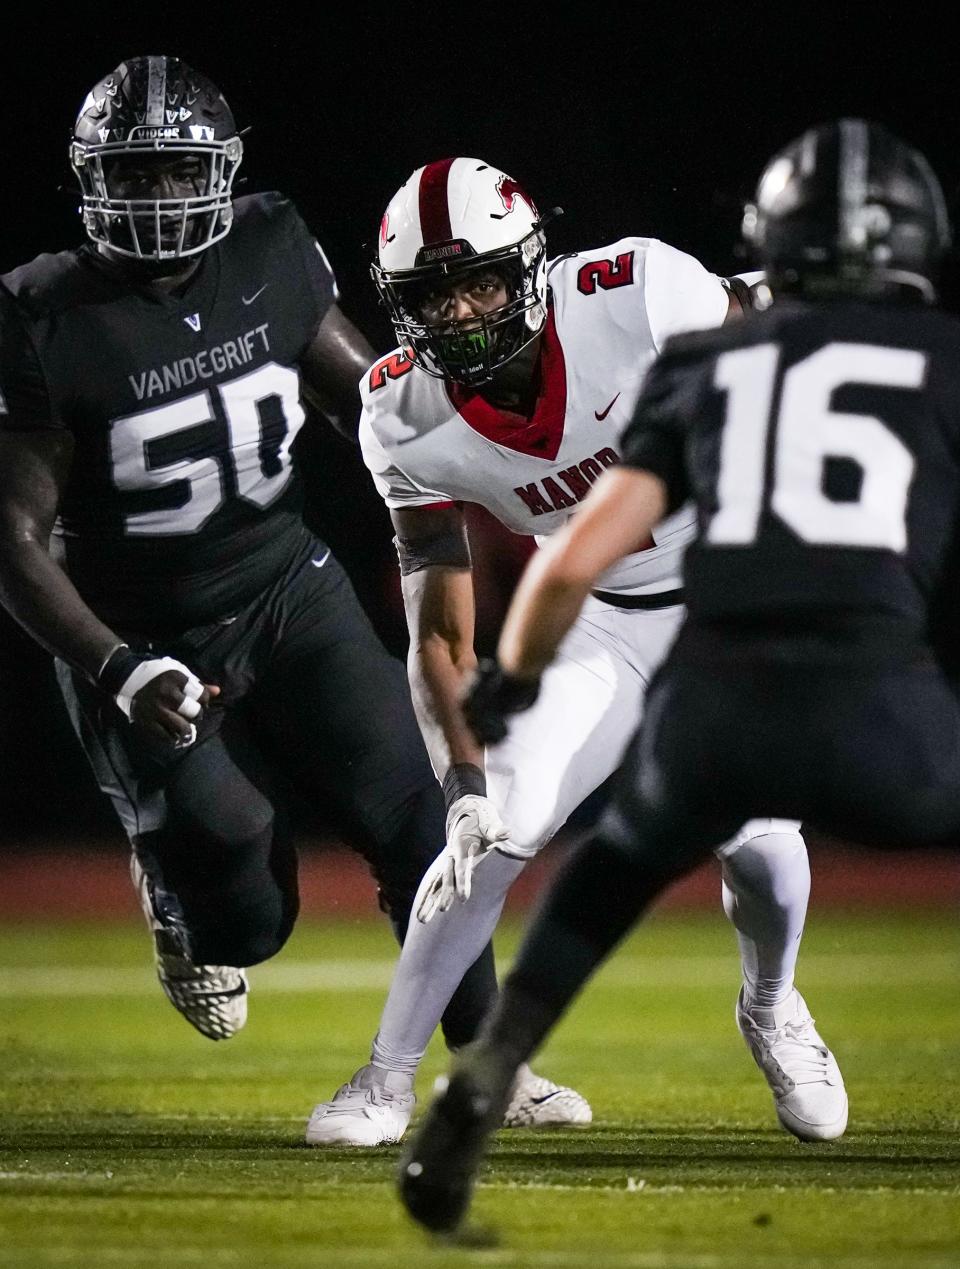 Manor running back Titus Petteway had trouble escaping Vandegrift's tough defense, including Jacob Henry, giving chase, and Jack Huerkamp on Friday night. The Vipers won the district game 51-6.